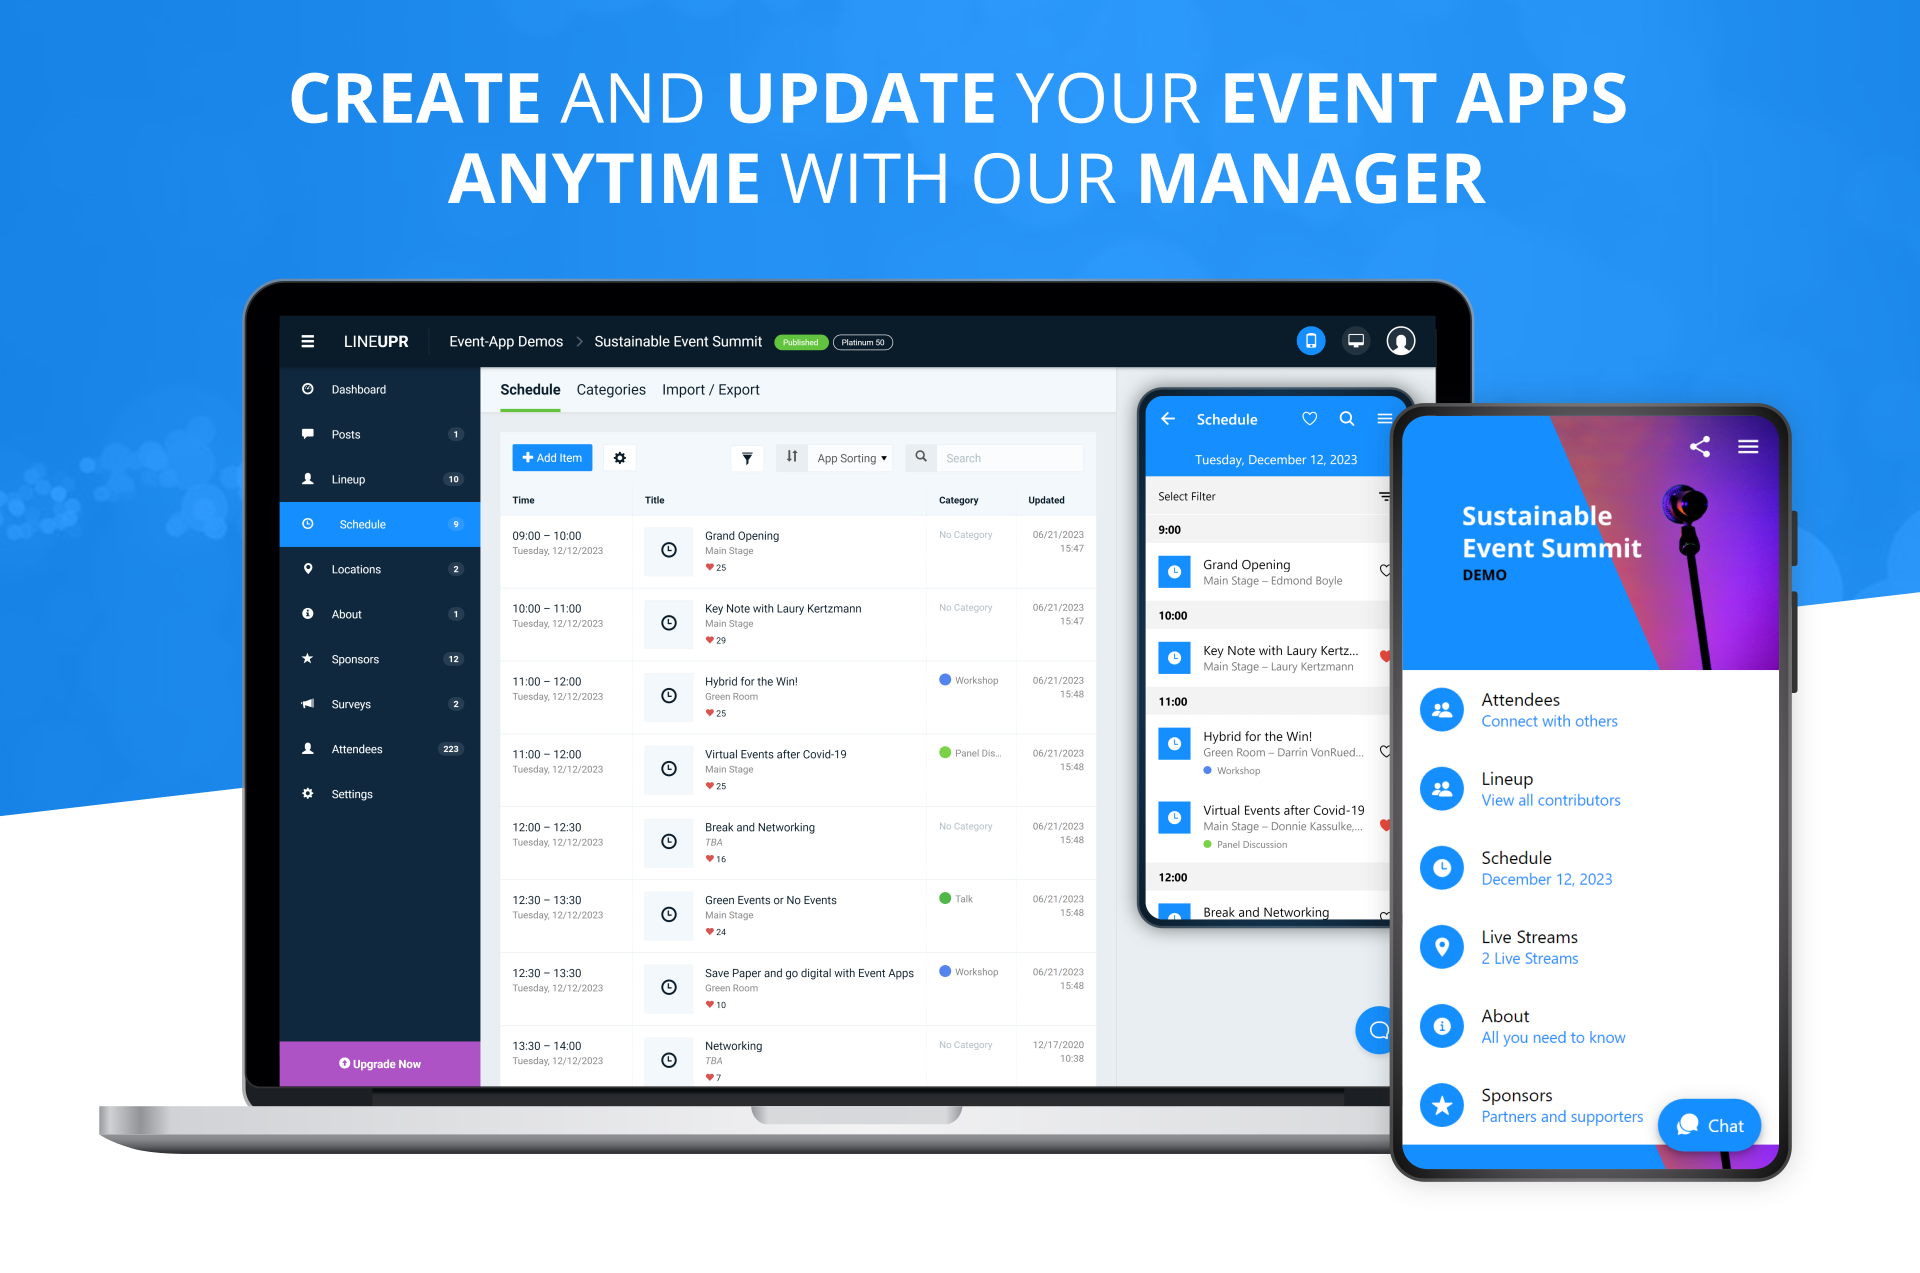 Our LineUpr manager makes it easy to create and update your event apps anytime you want. Our solution gives you the most flexibility whenever you need to inform or update your attendees.